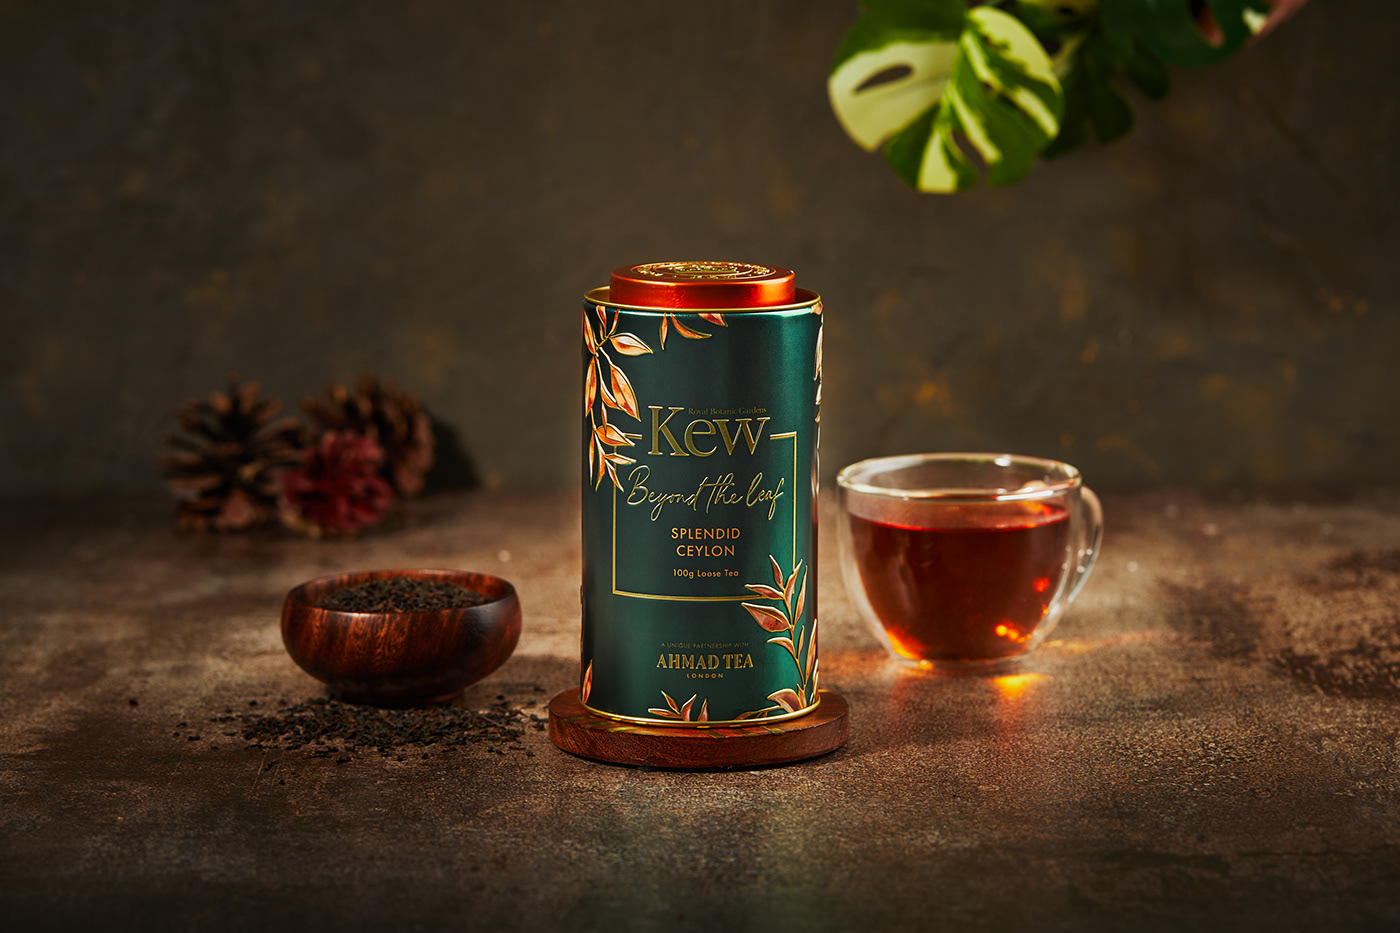 Food Photography and styling for premium tea range